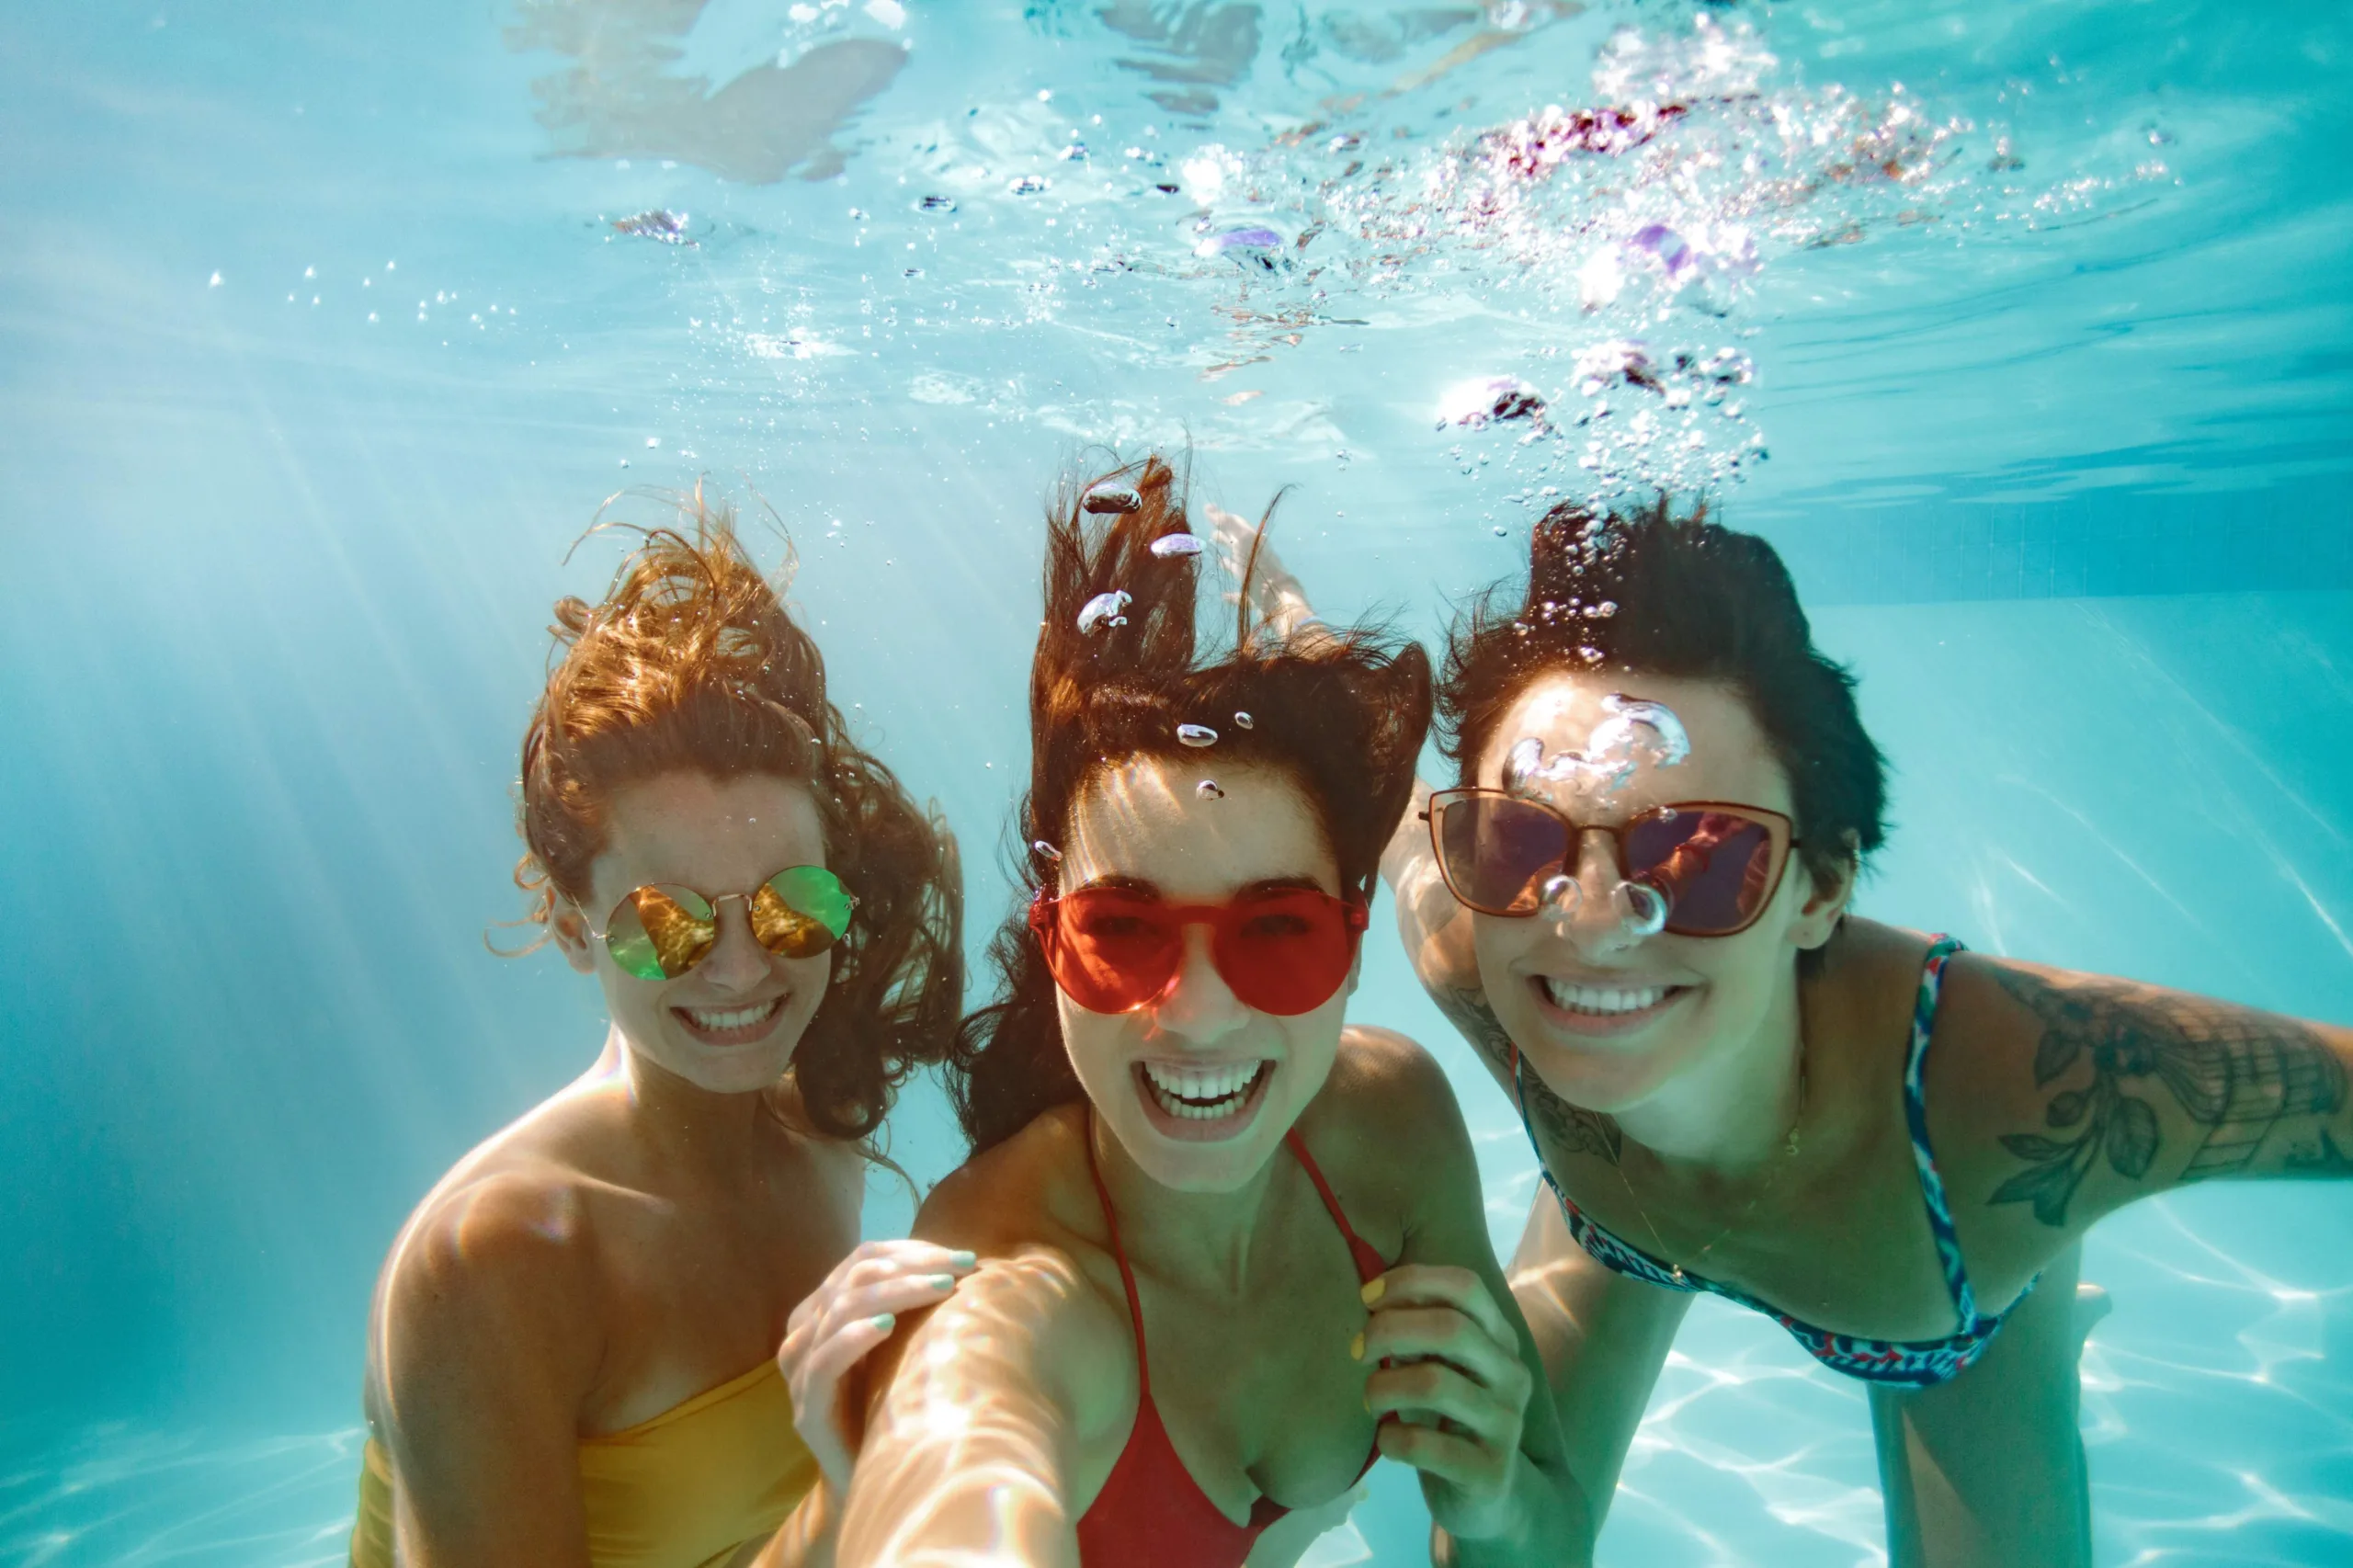 Three young women who are close friends take a selfie underwater with sunglasses on and bubbles coming out of their mouths from smiling and laughing. The woman on the left has gold sunglasses on and wearing a mustard yellow swimsuit. She is holding the middle woman's arm who is taking the picture with her right arm and has red sunglasses and a red bikini on. The third woman is on the far right and in a blue and white abstract pattern bikini with brown sunglasses on and a left arm tattoo of a plant with flowers and a bird cage.